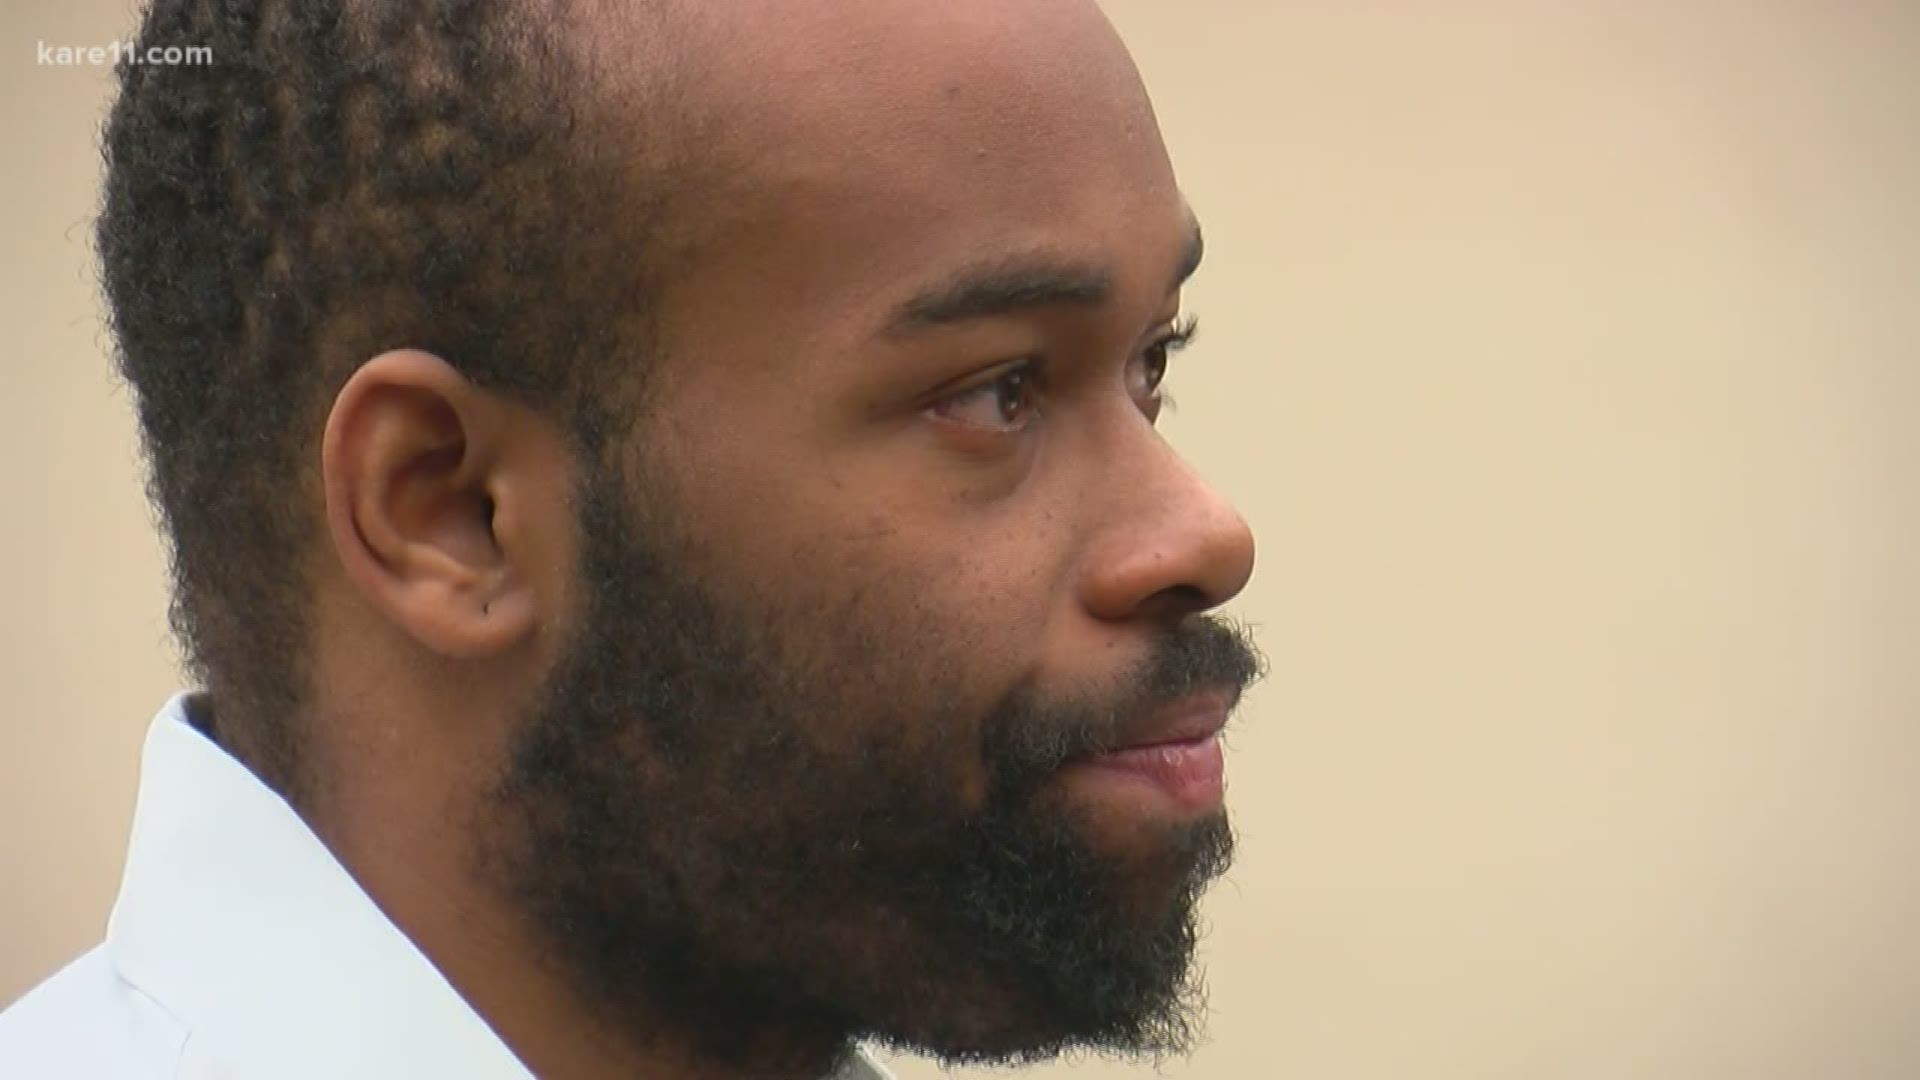 The man who threw a little boy over a Mall of America balcony showed little emotion while being sentenced.